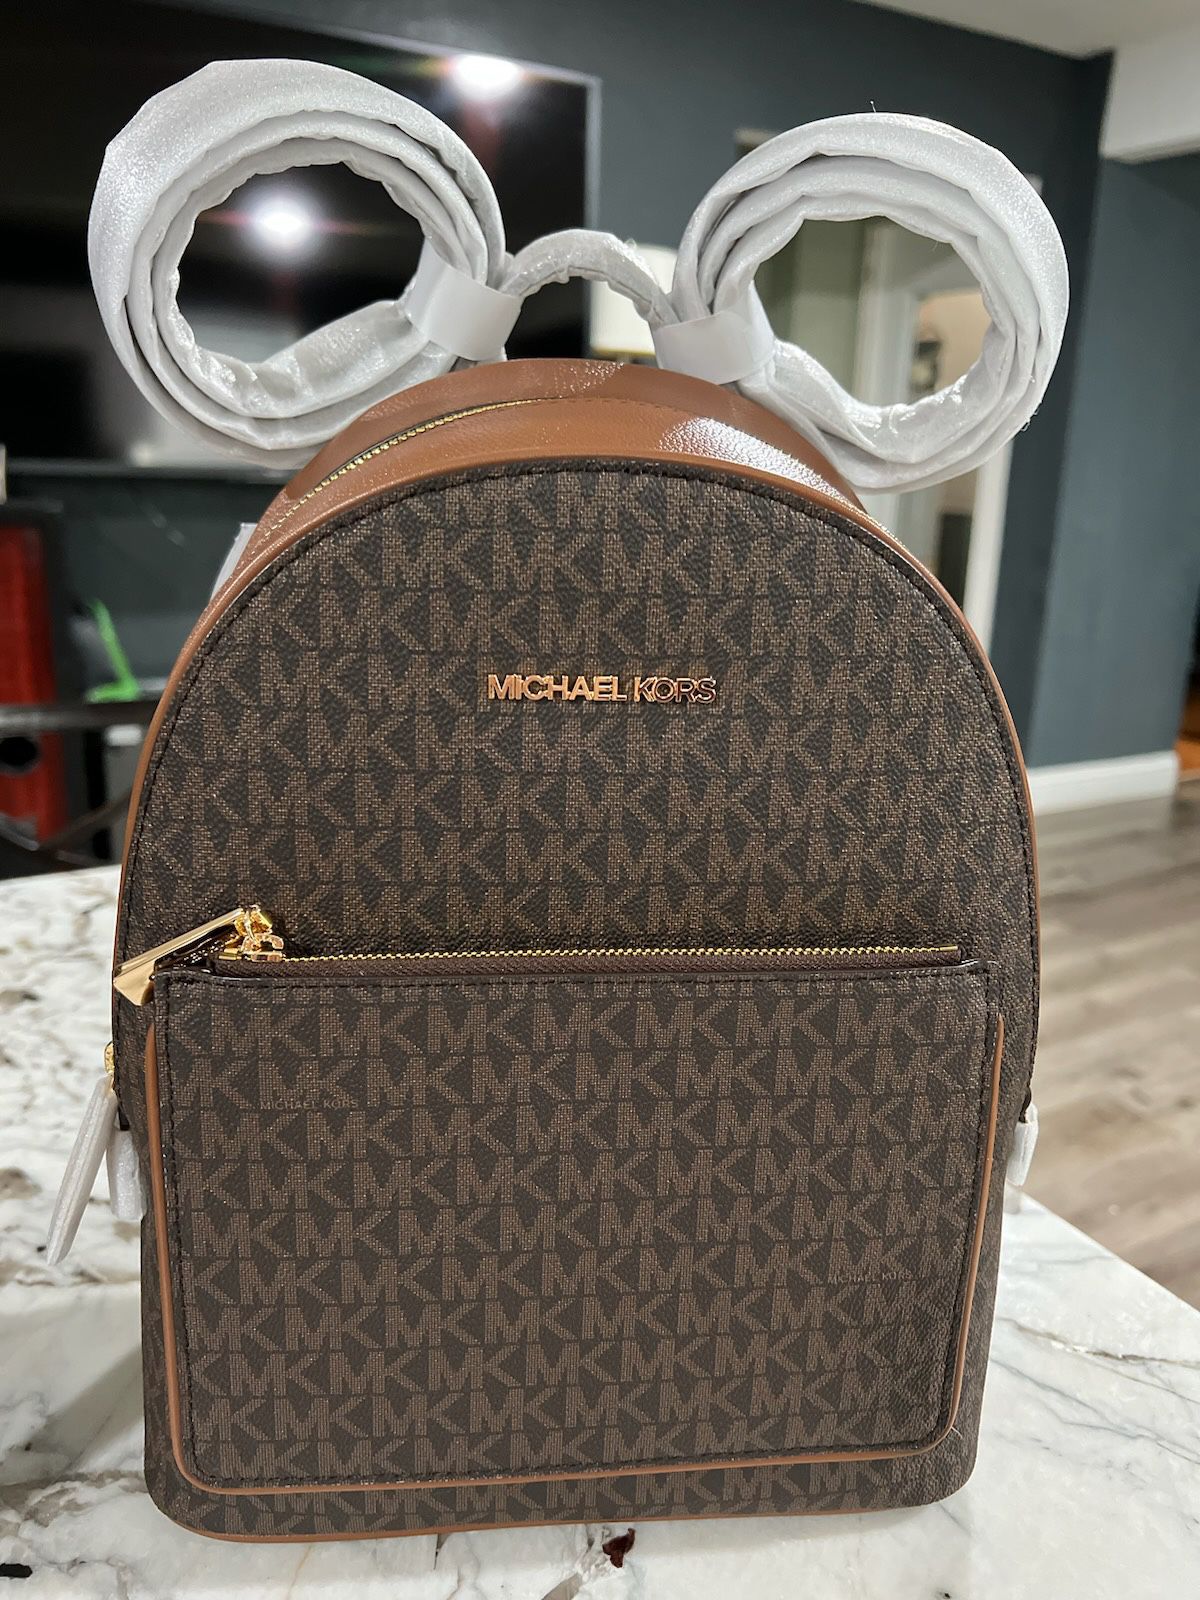 Michael Kors Backpack for Sale in Dallas, TX - OfferUp